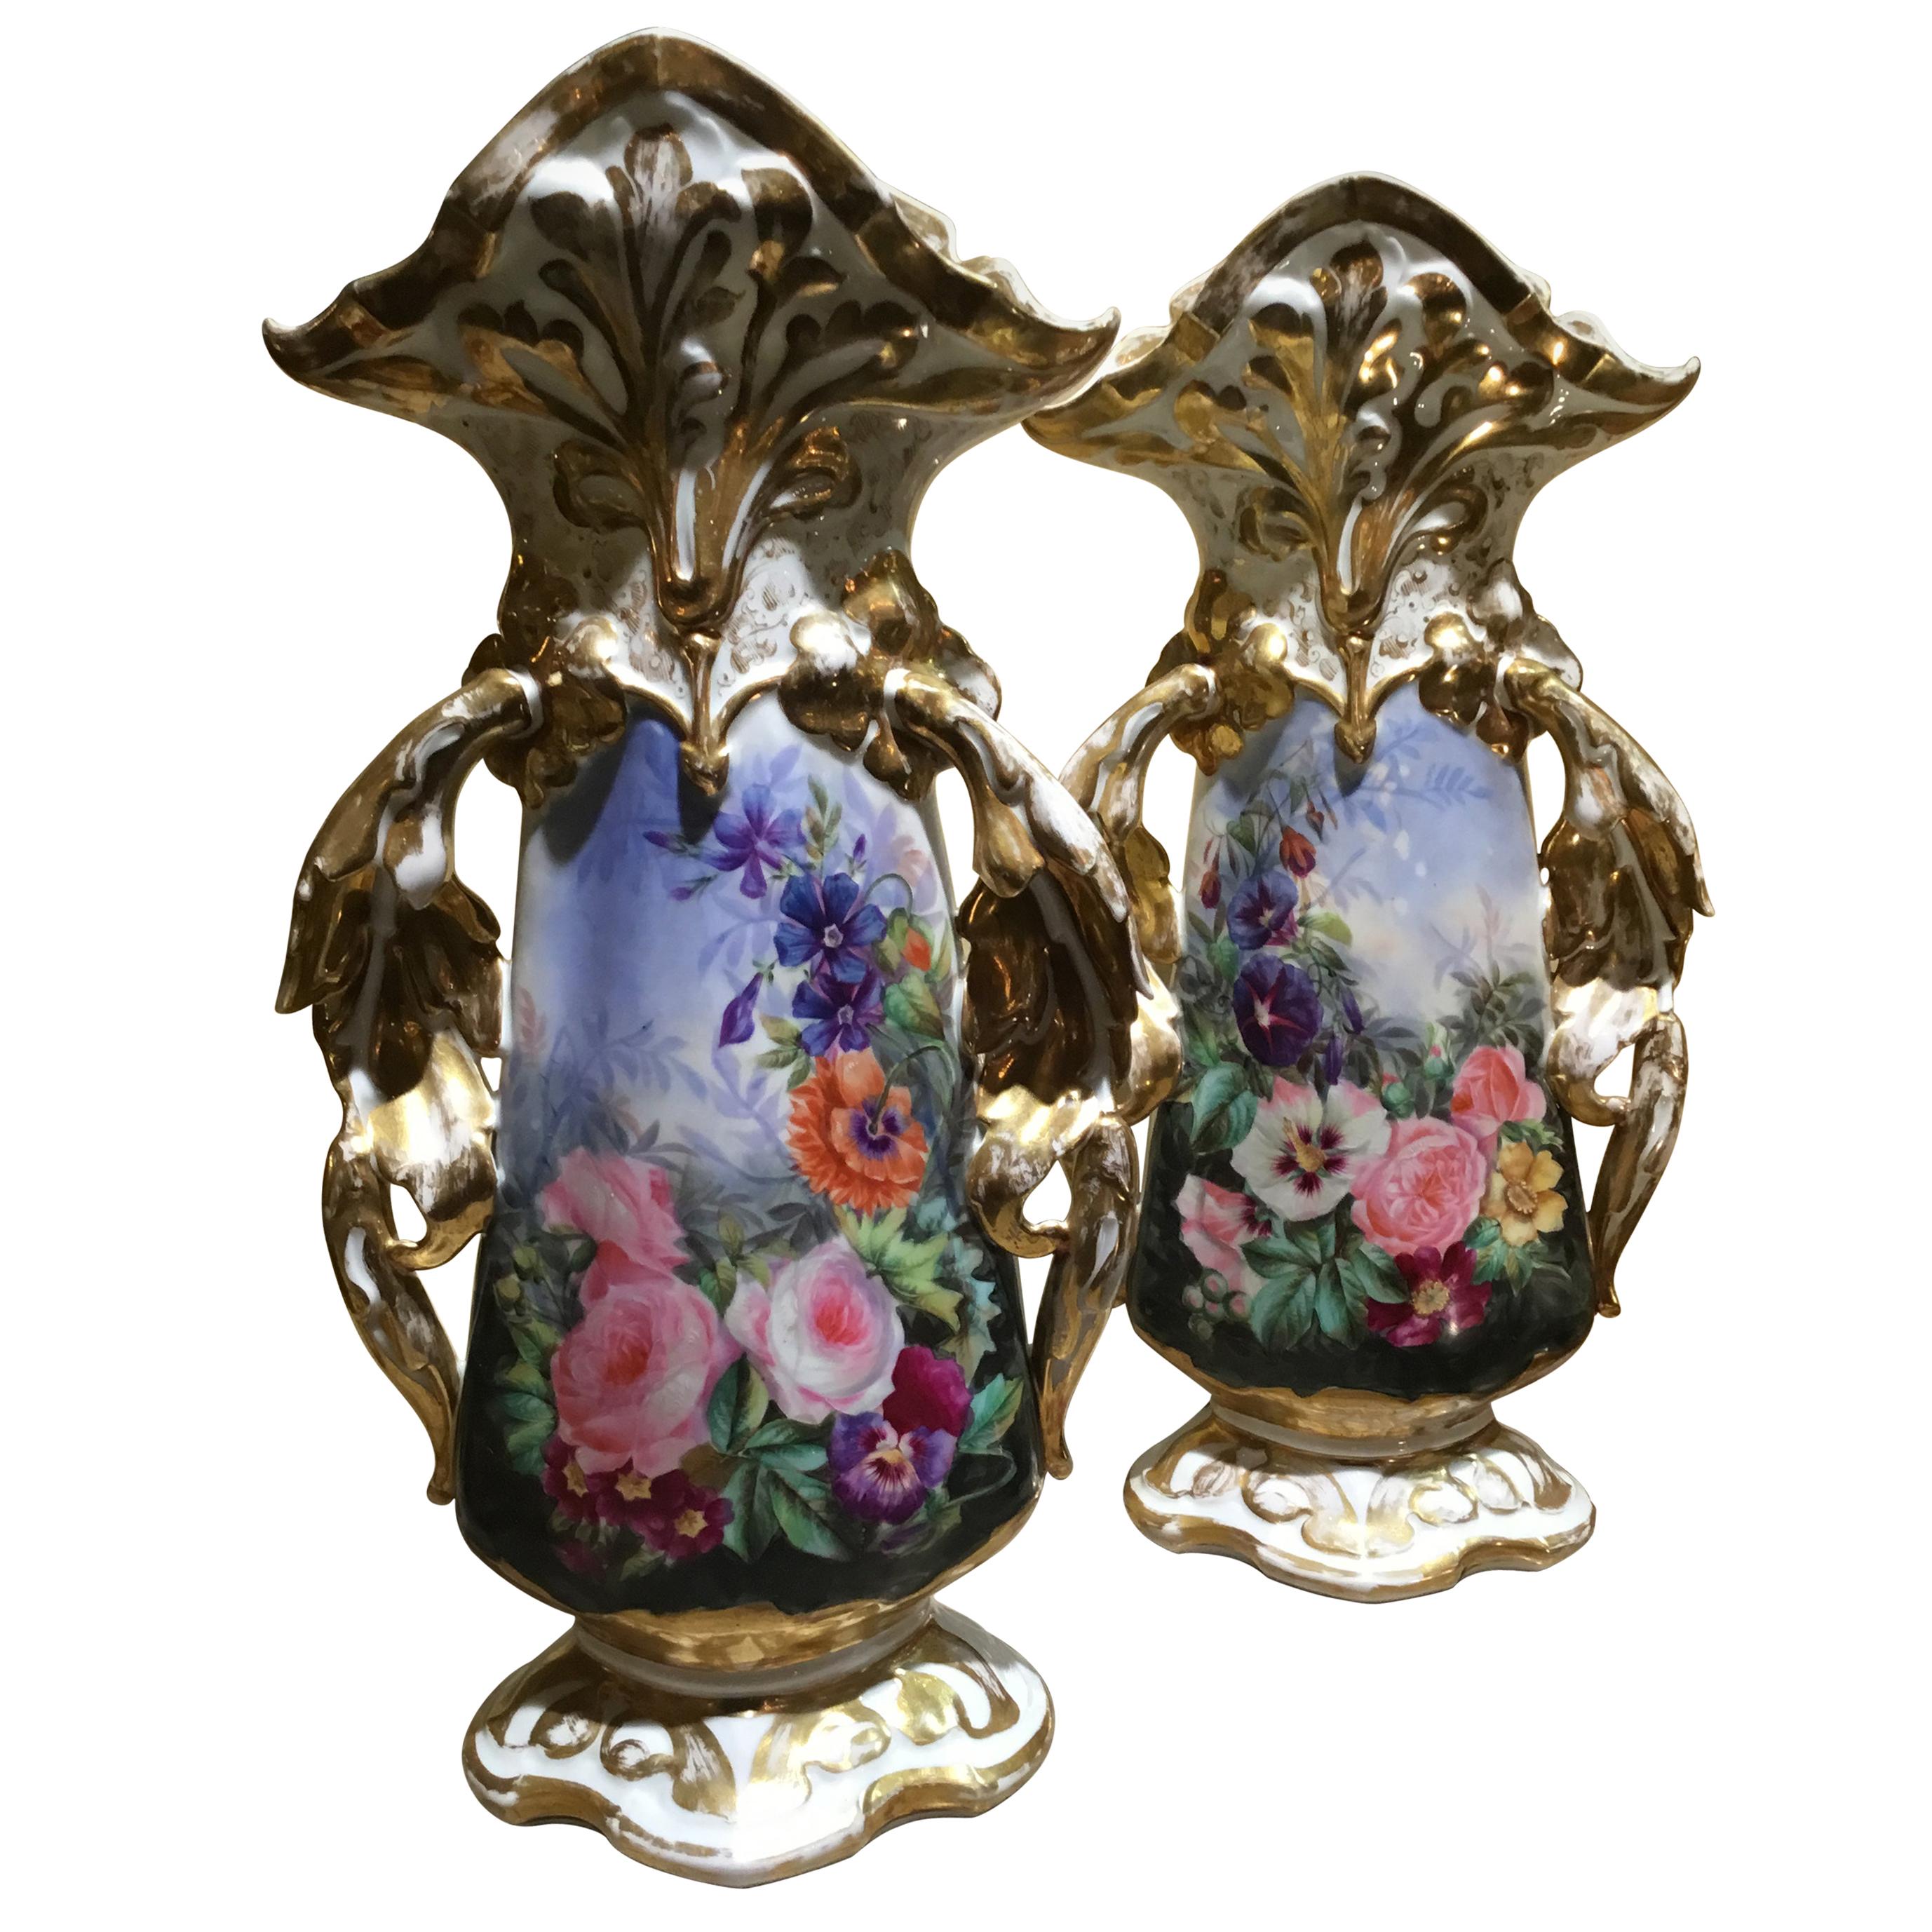 Pair of Large French Porcelain Fan Vases with Floral and Gilt Painting